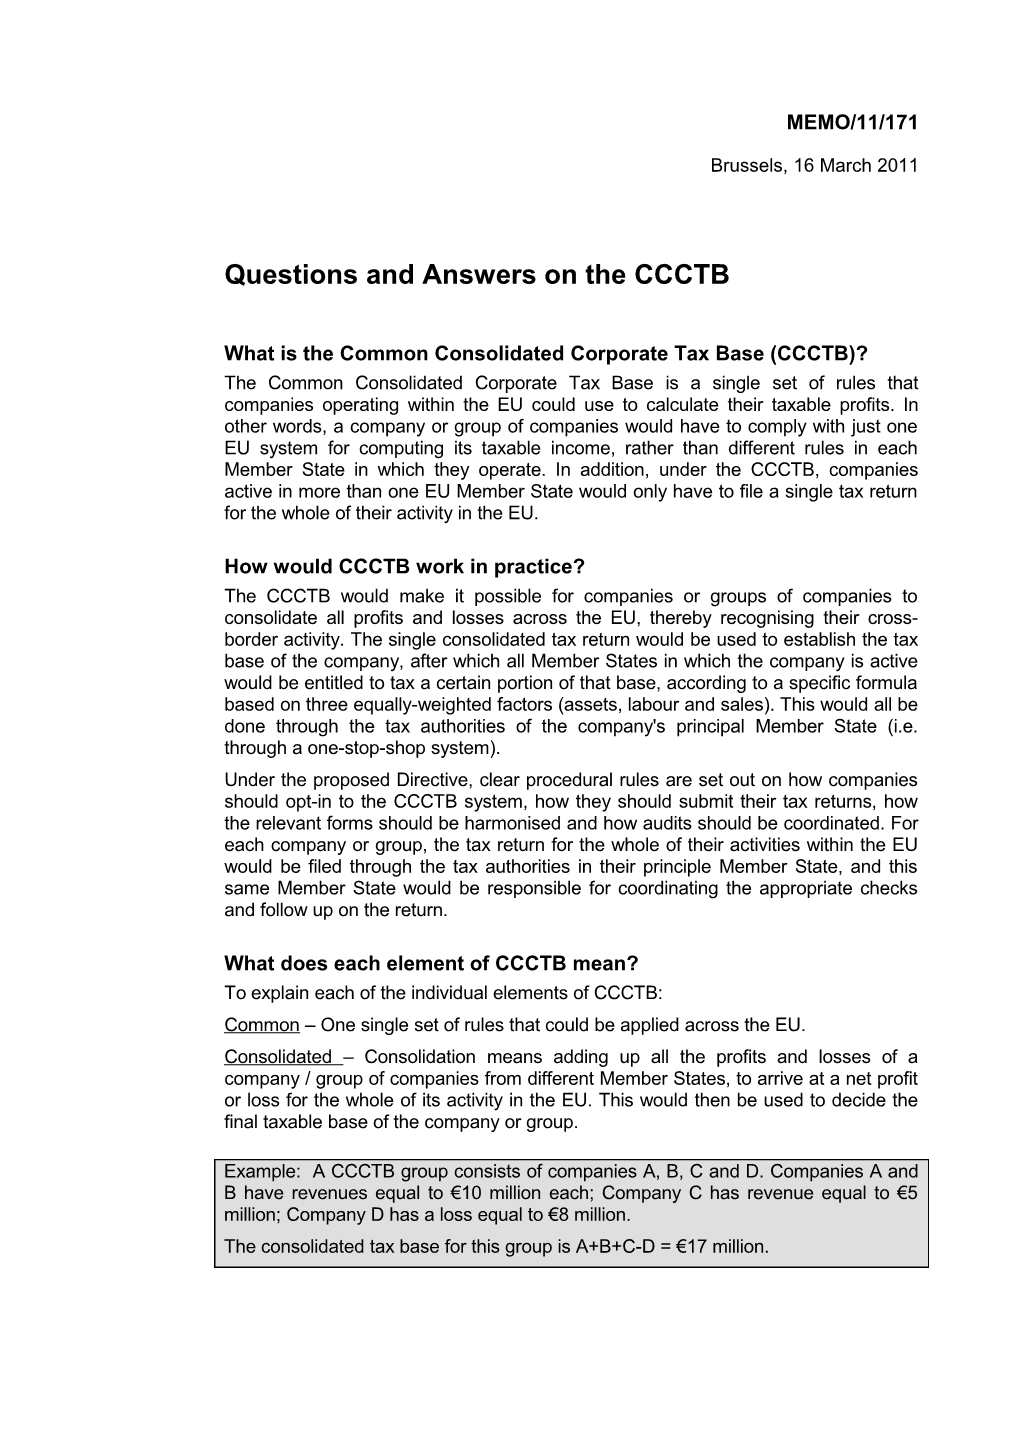 Questions and Answers on the CCCTB